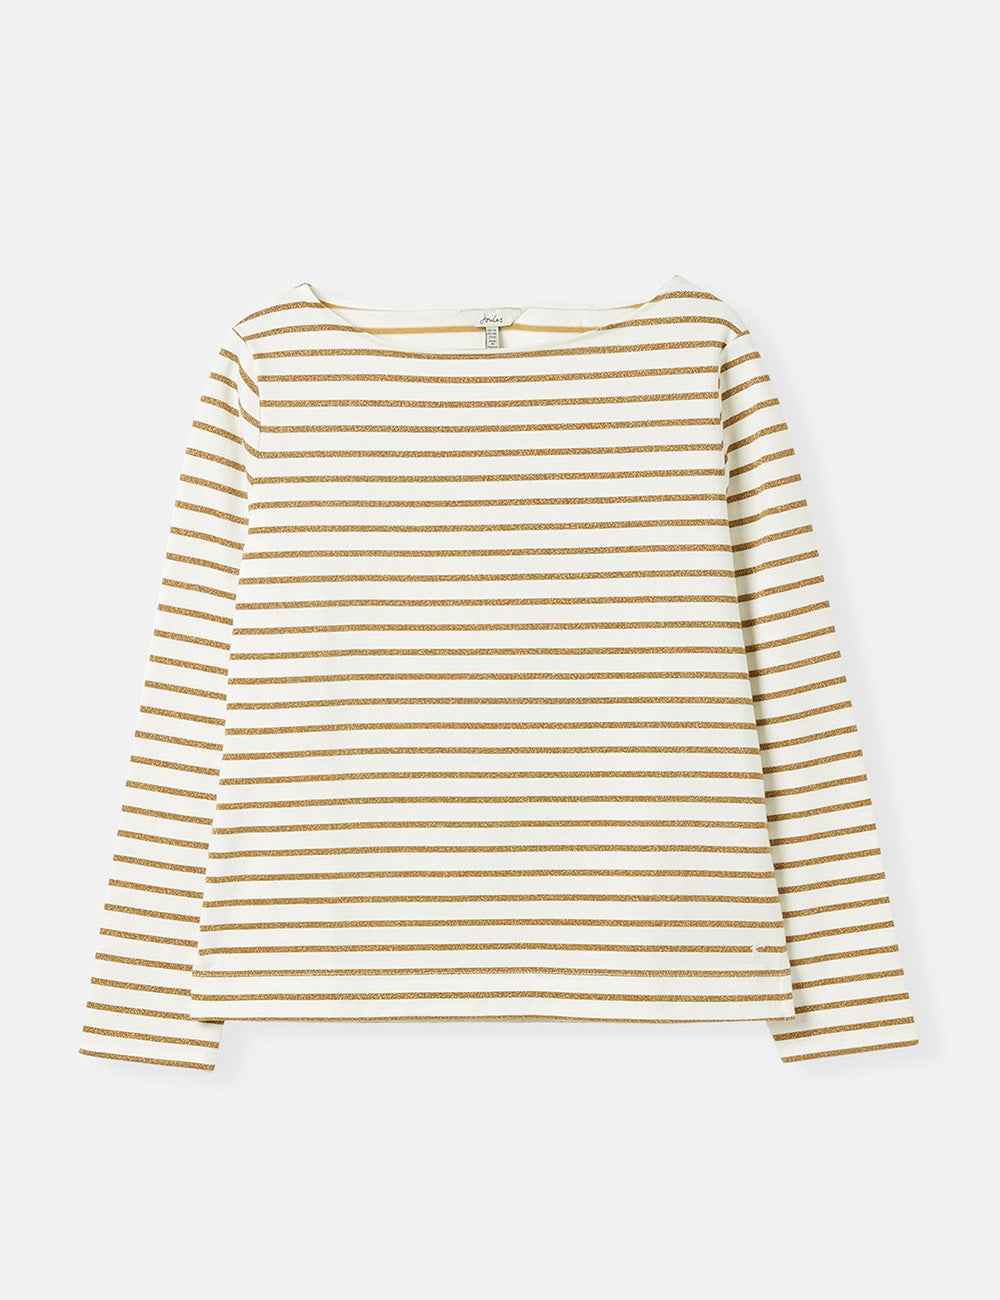 Joules Harbour Long Sleeve Top - Gold Stripe